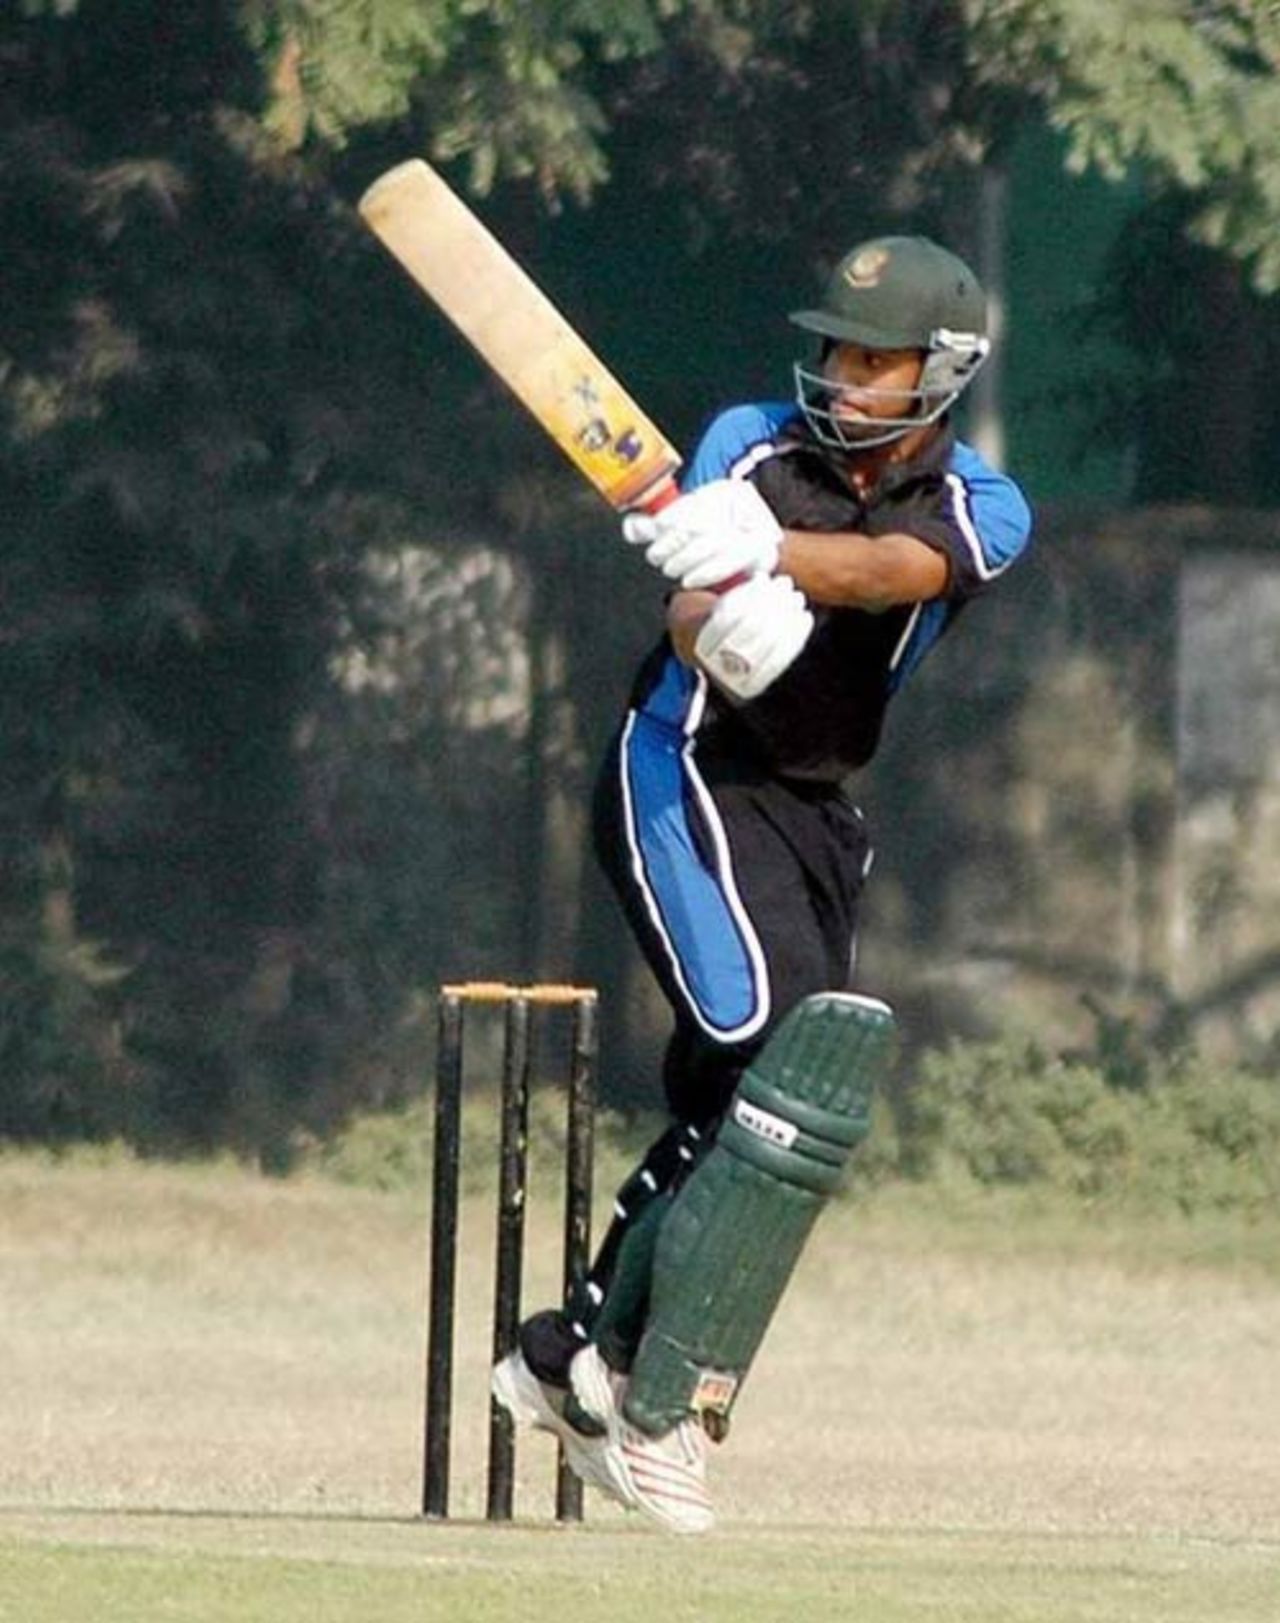 Old DOHS' opening batsman Tamim Iqbal plays one on the on-side during his 41-ball 67 against Partex SC in the KAI-Altech Premier Division 20/20 Cricket League 2006-07, Dhanmondi, December 20, 2006